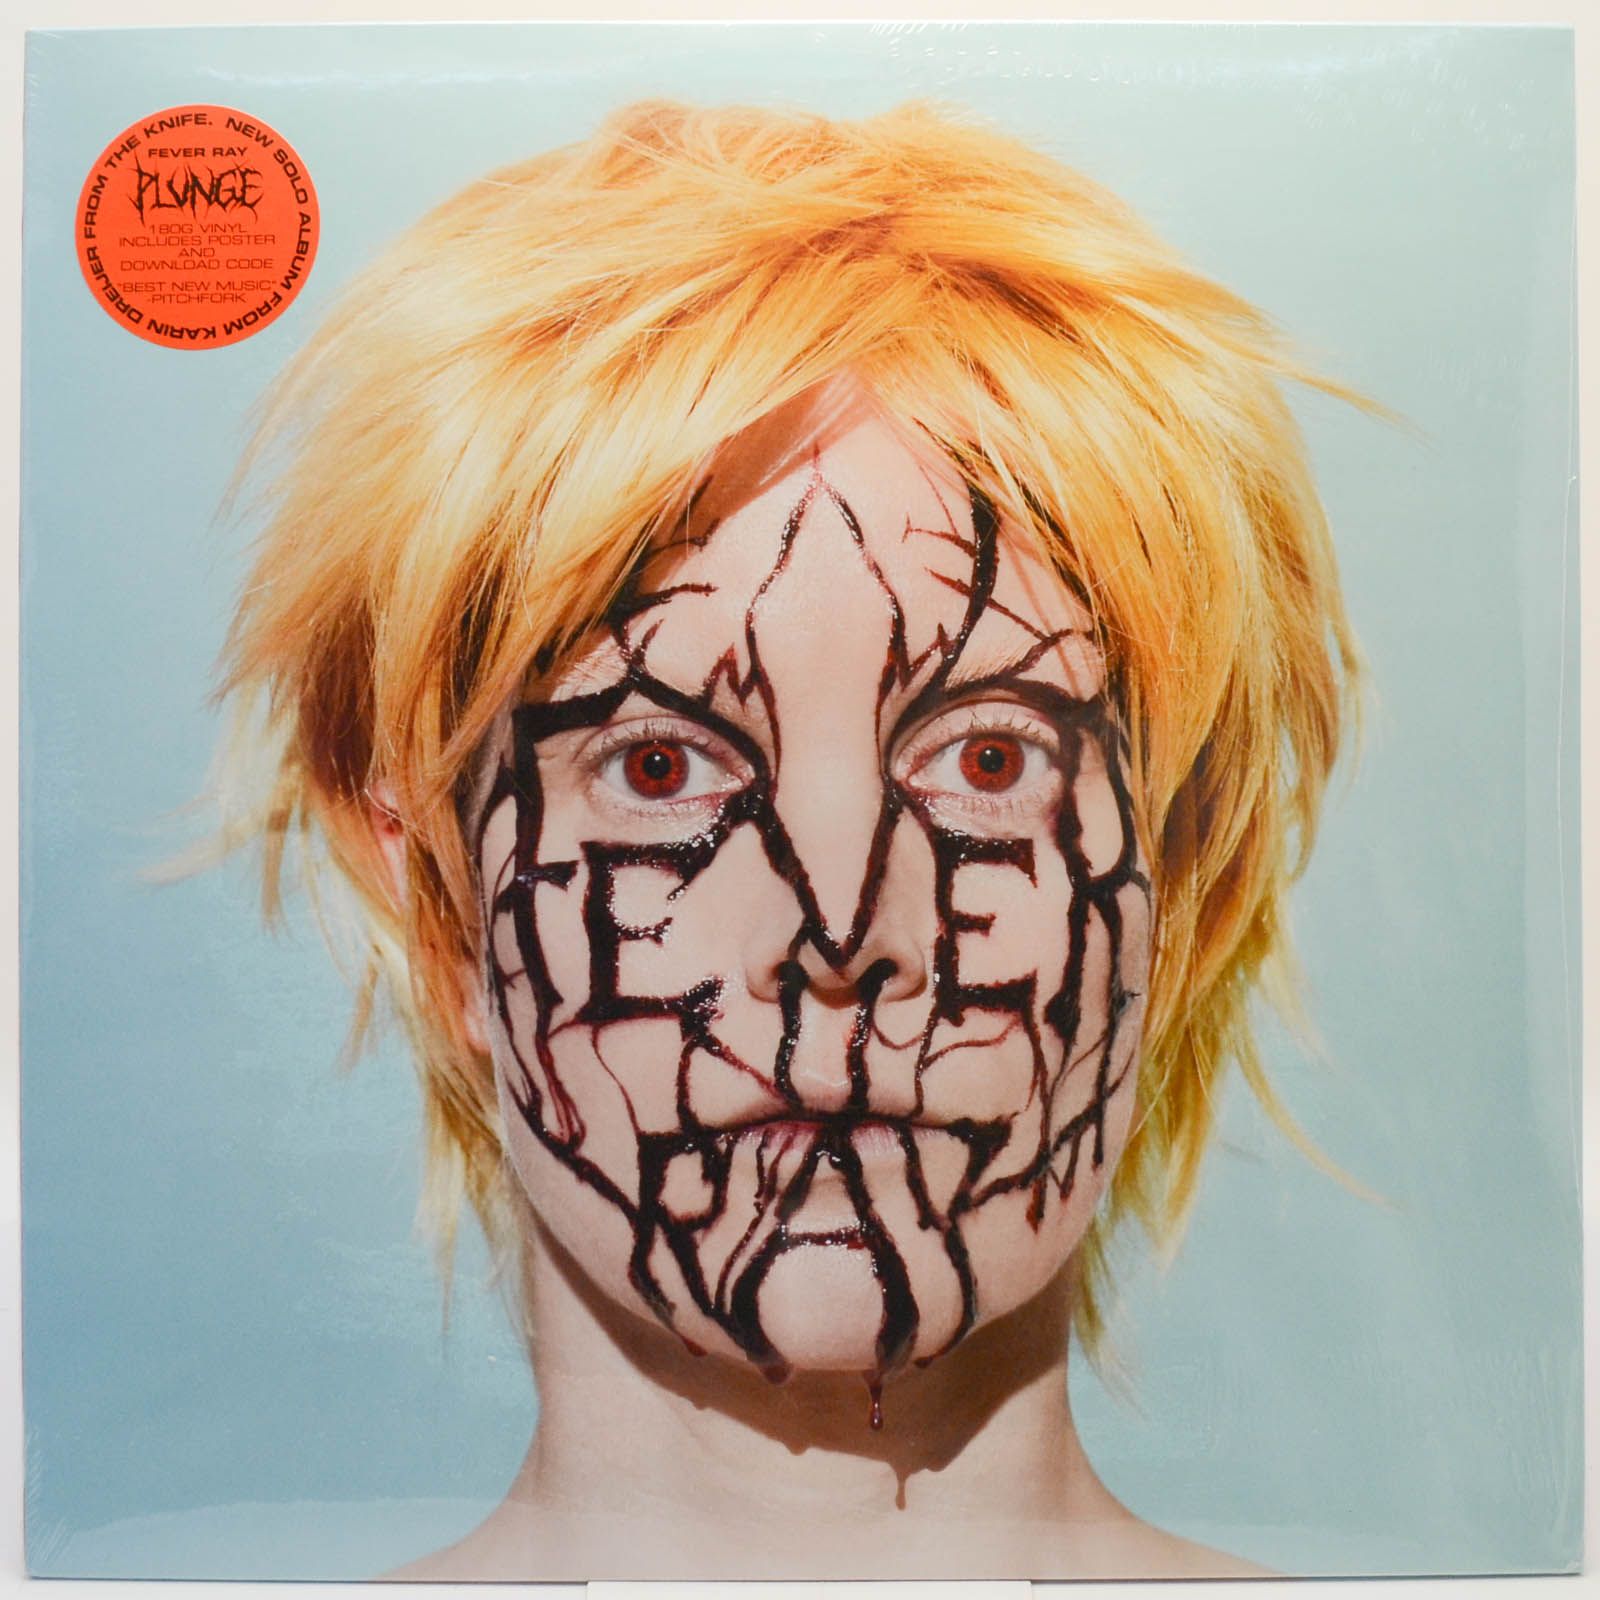 Fever Ray — Plunge, 2017